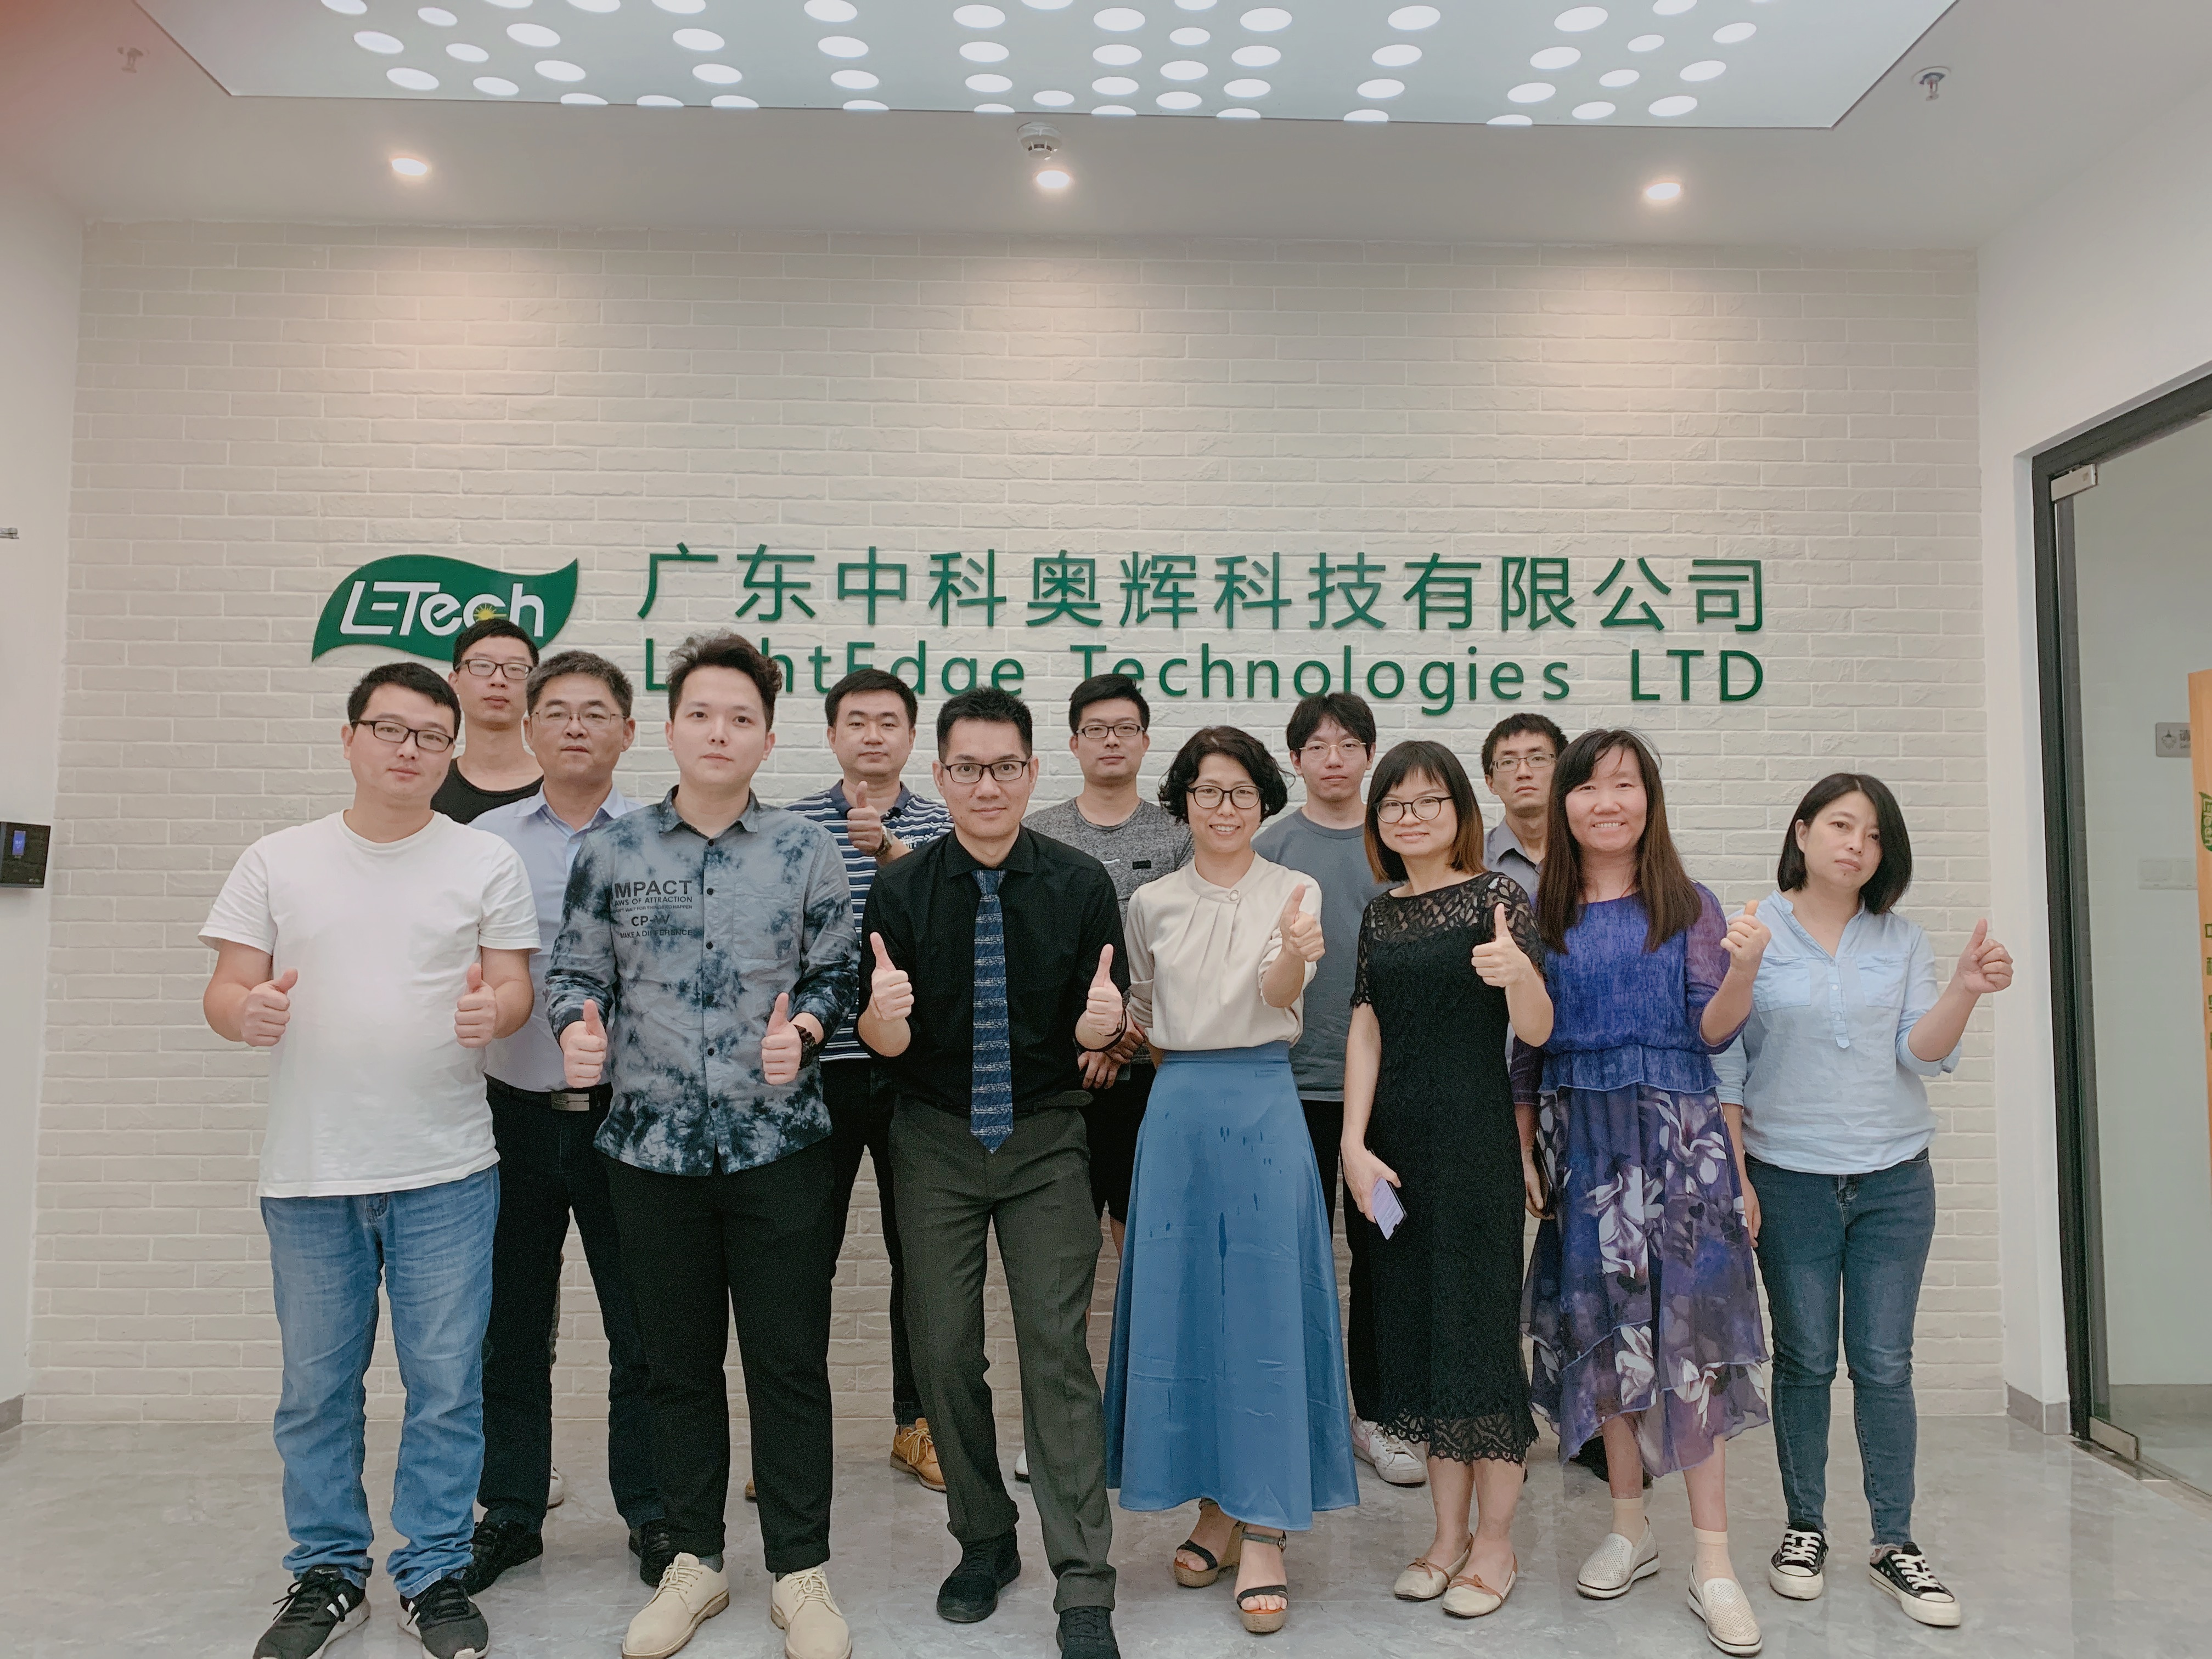 Zhongke Aohui launched the special training on "Efficient Time Management" 